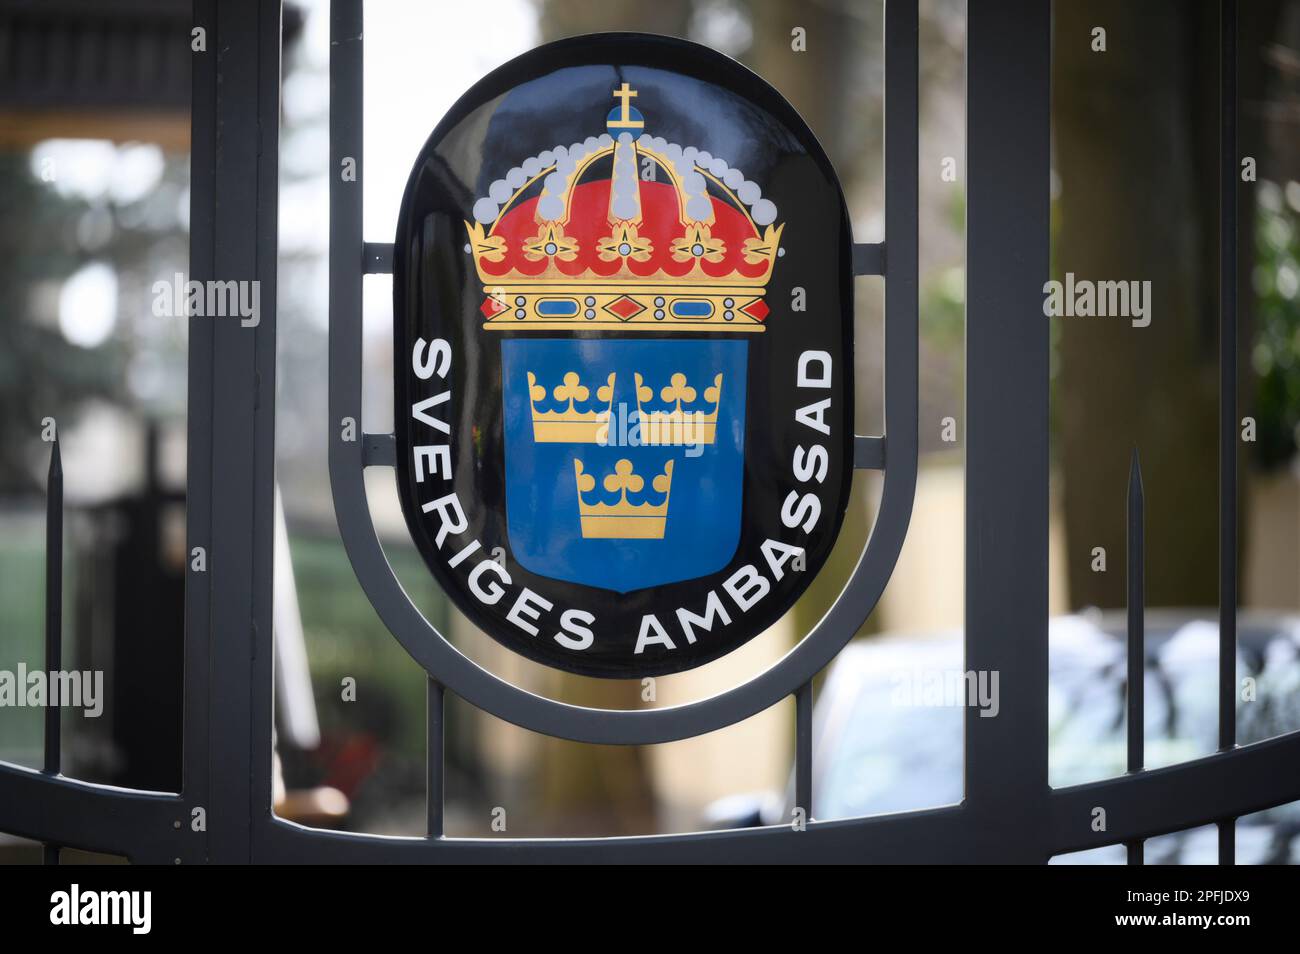 The Swedish coat of arms is seen at the entrance of the Swedish embassy in Warsaw, Poland on 17 March, 2023. Mariusz Dworakowski, a 47 year old Polish man arrested in December 2021 by Sweidsh police is currently serving time in jail in Sweden. Family membes say Mariusz was in the wrong place at the wrong time and was forced to remain lying on the street in freezing cold temperatures after suffering physical abuse by police. His family is demanding financial compensation for permanent injuries suffered during the arrest. Swedish authorities deny any wrongdoing by police and say the Mariusz will Stock Photo